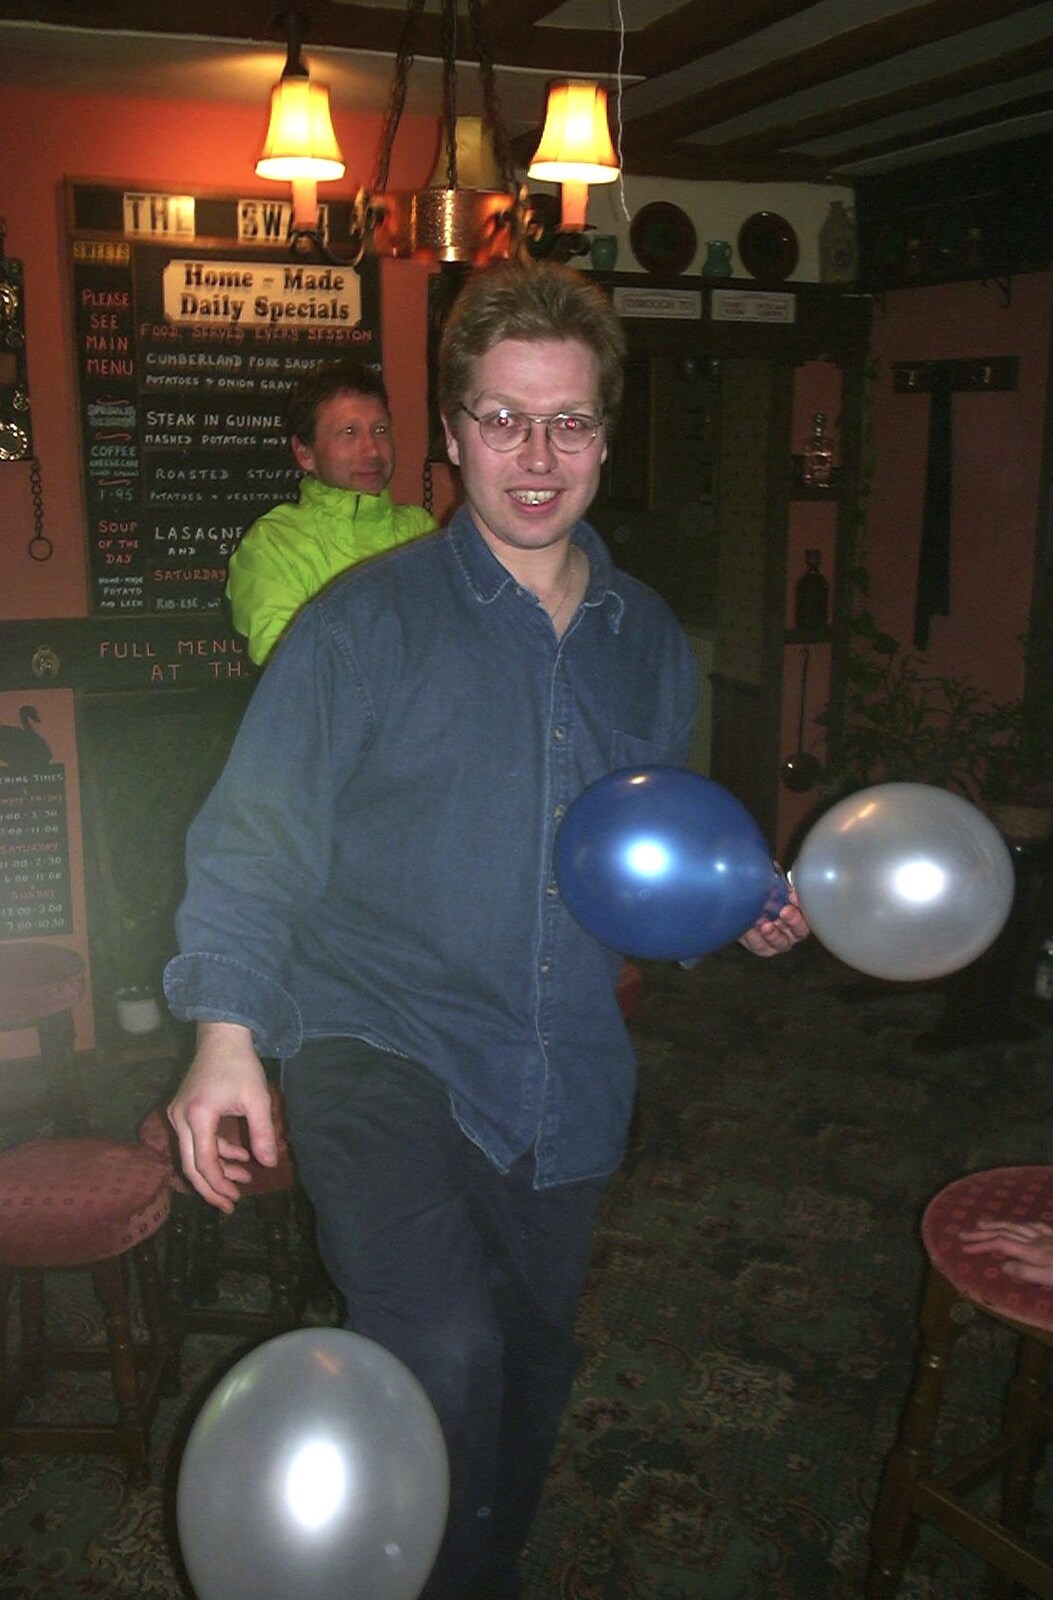 Paul and Claire's Engagement Party, Brome Swan, Suffolk - 27th March 2004: Marc kicks balloons about